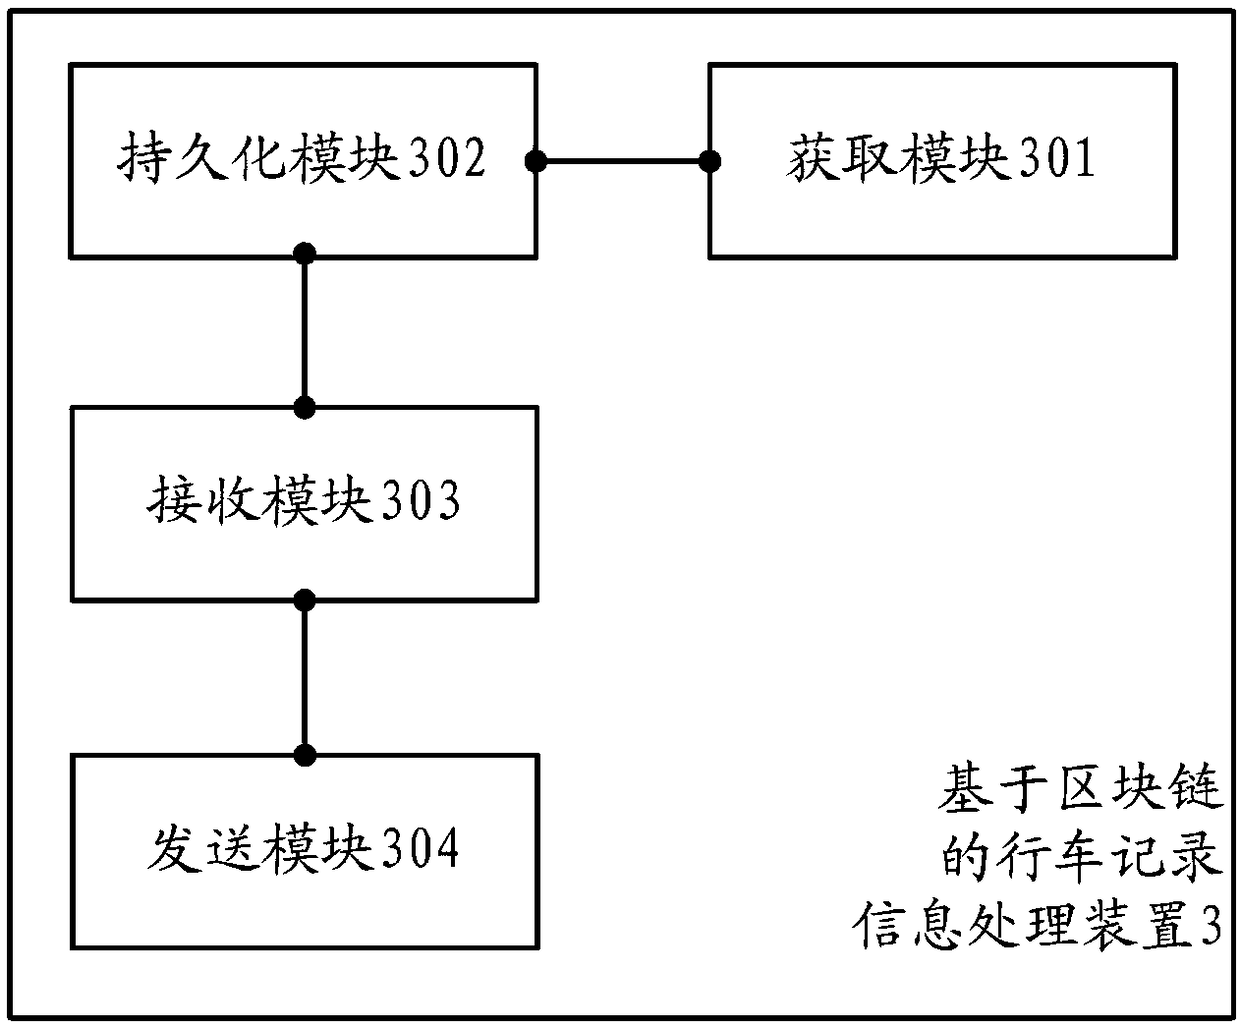 Driving record information processing method and device based on blockchain